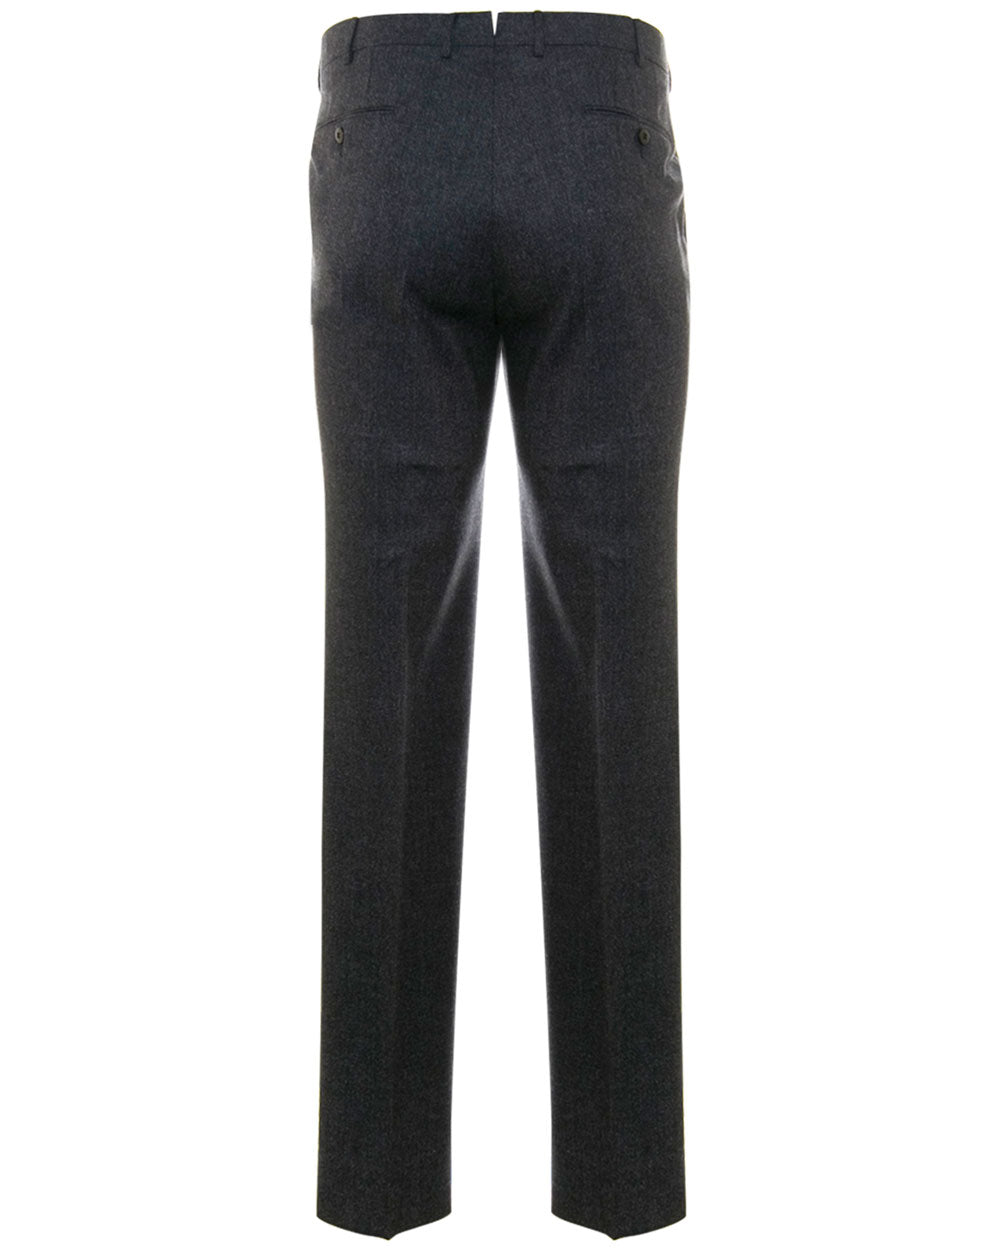 Anthracite Wool Trouser